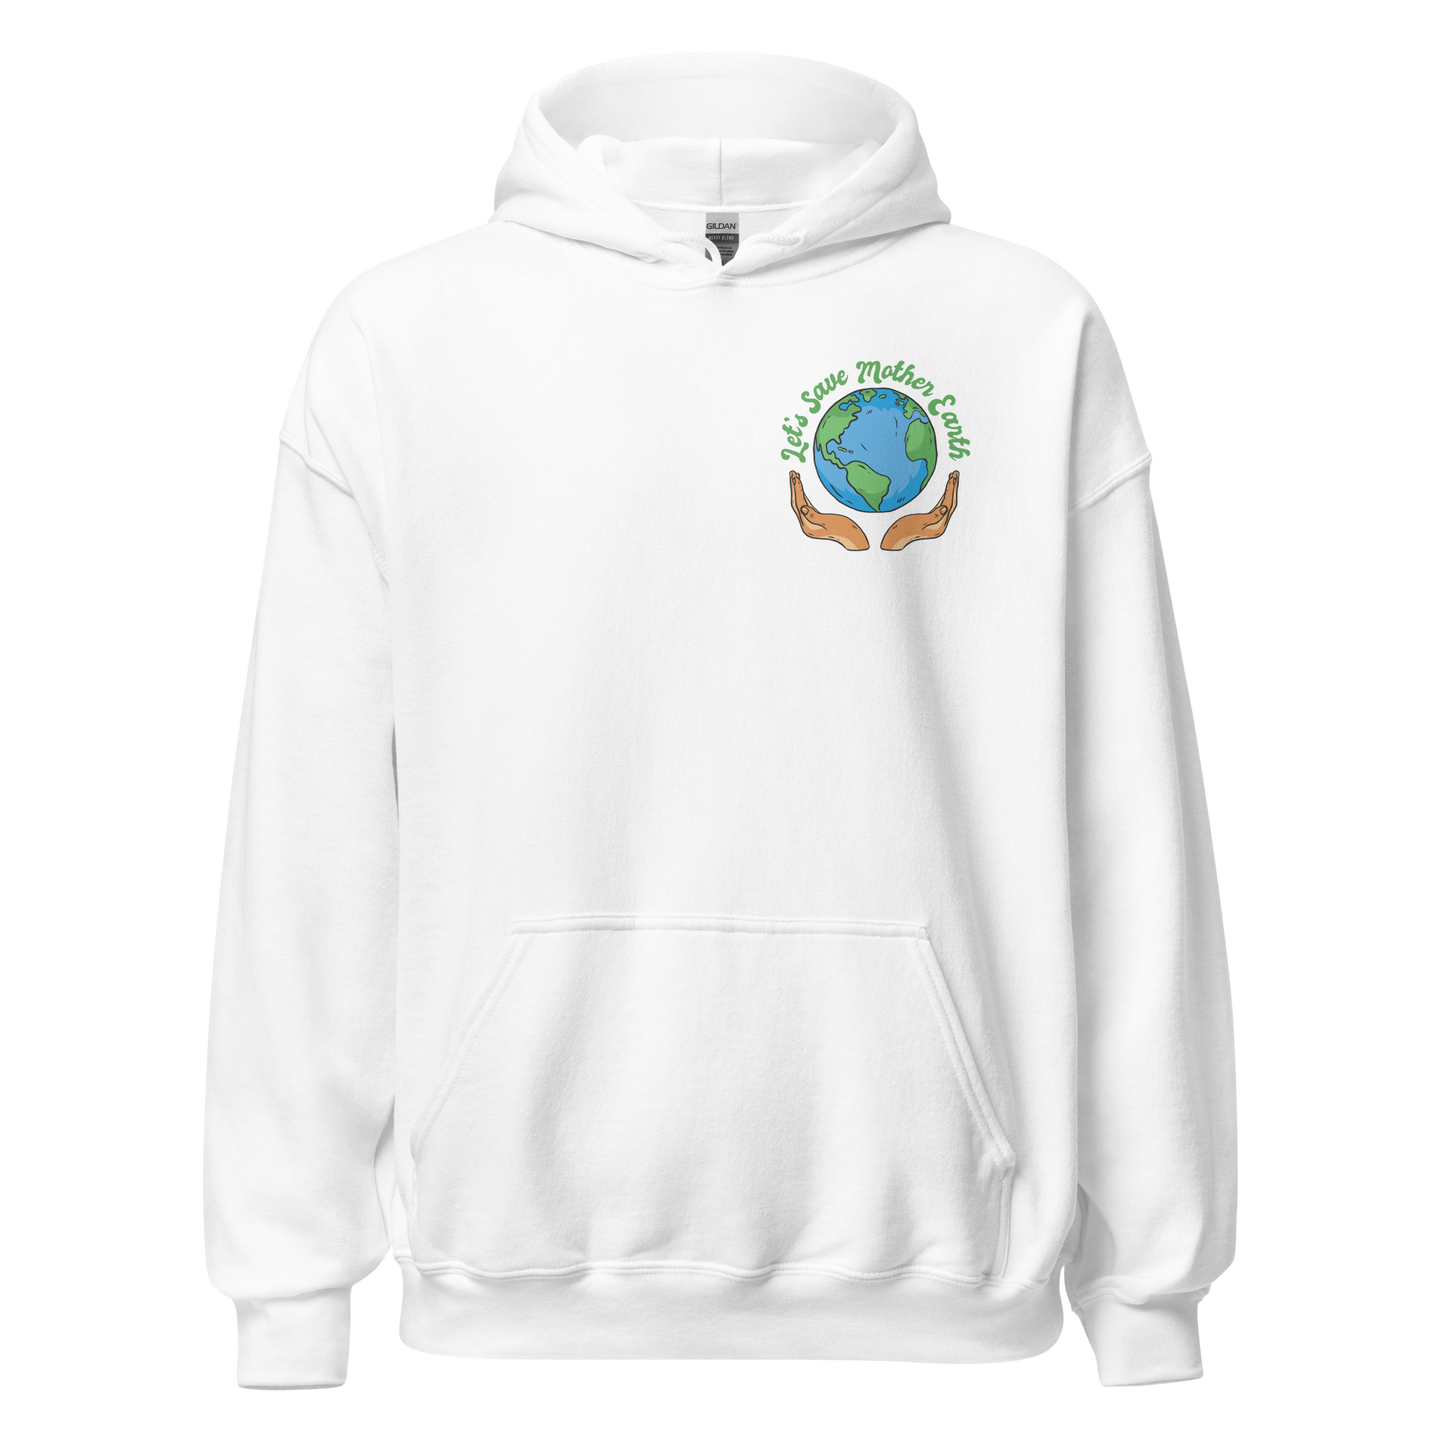 Hands holding planet earth | Unisex Hoodie - F&B